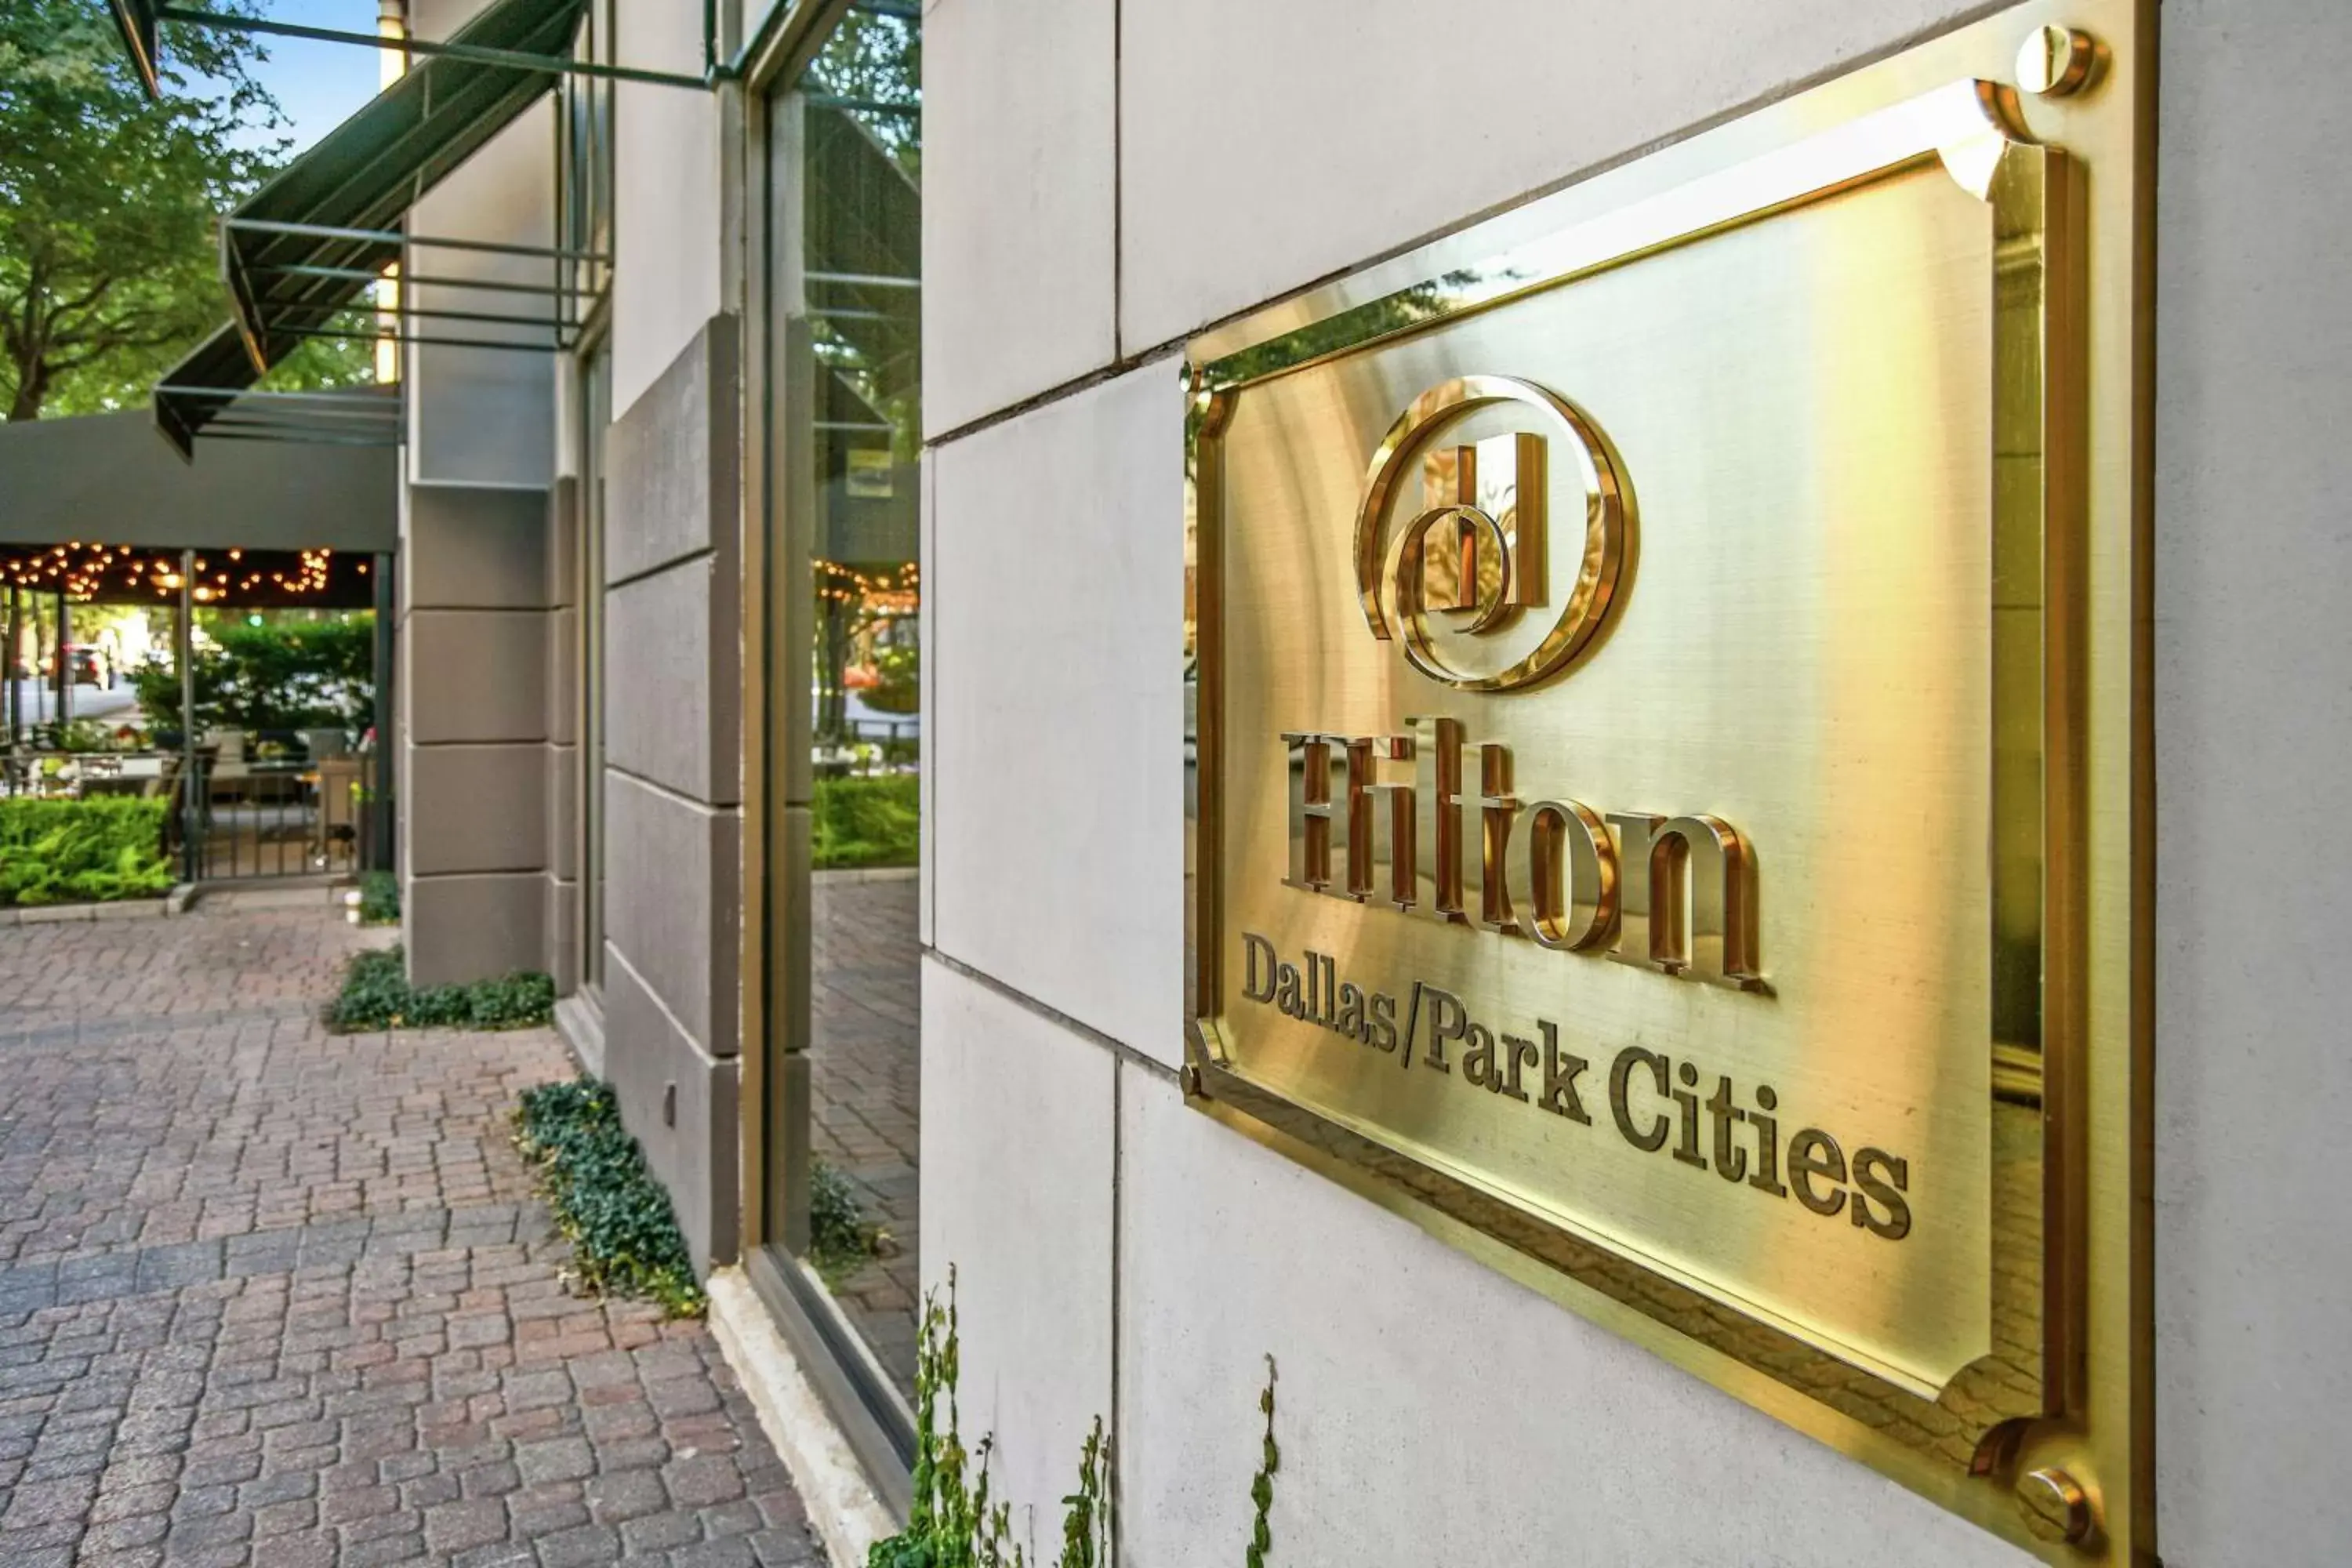 Property building, Property Logo/Sign in Hilton Dallas-Park Cities